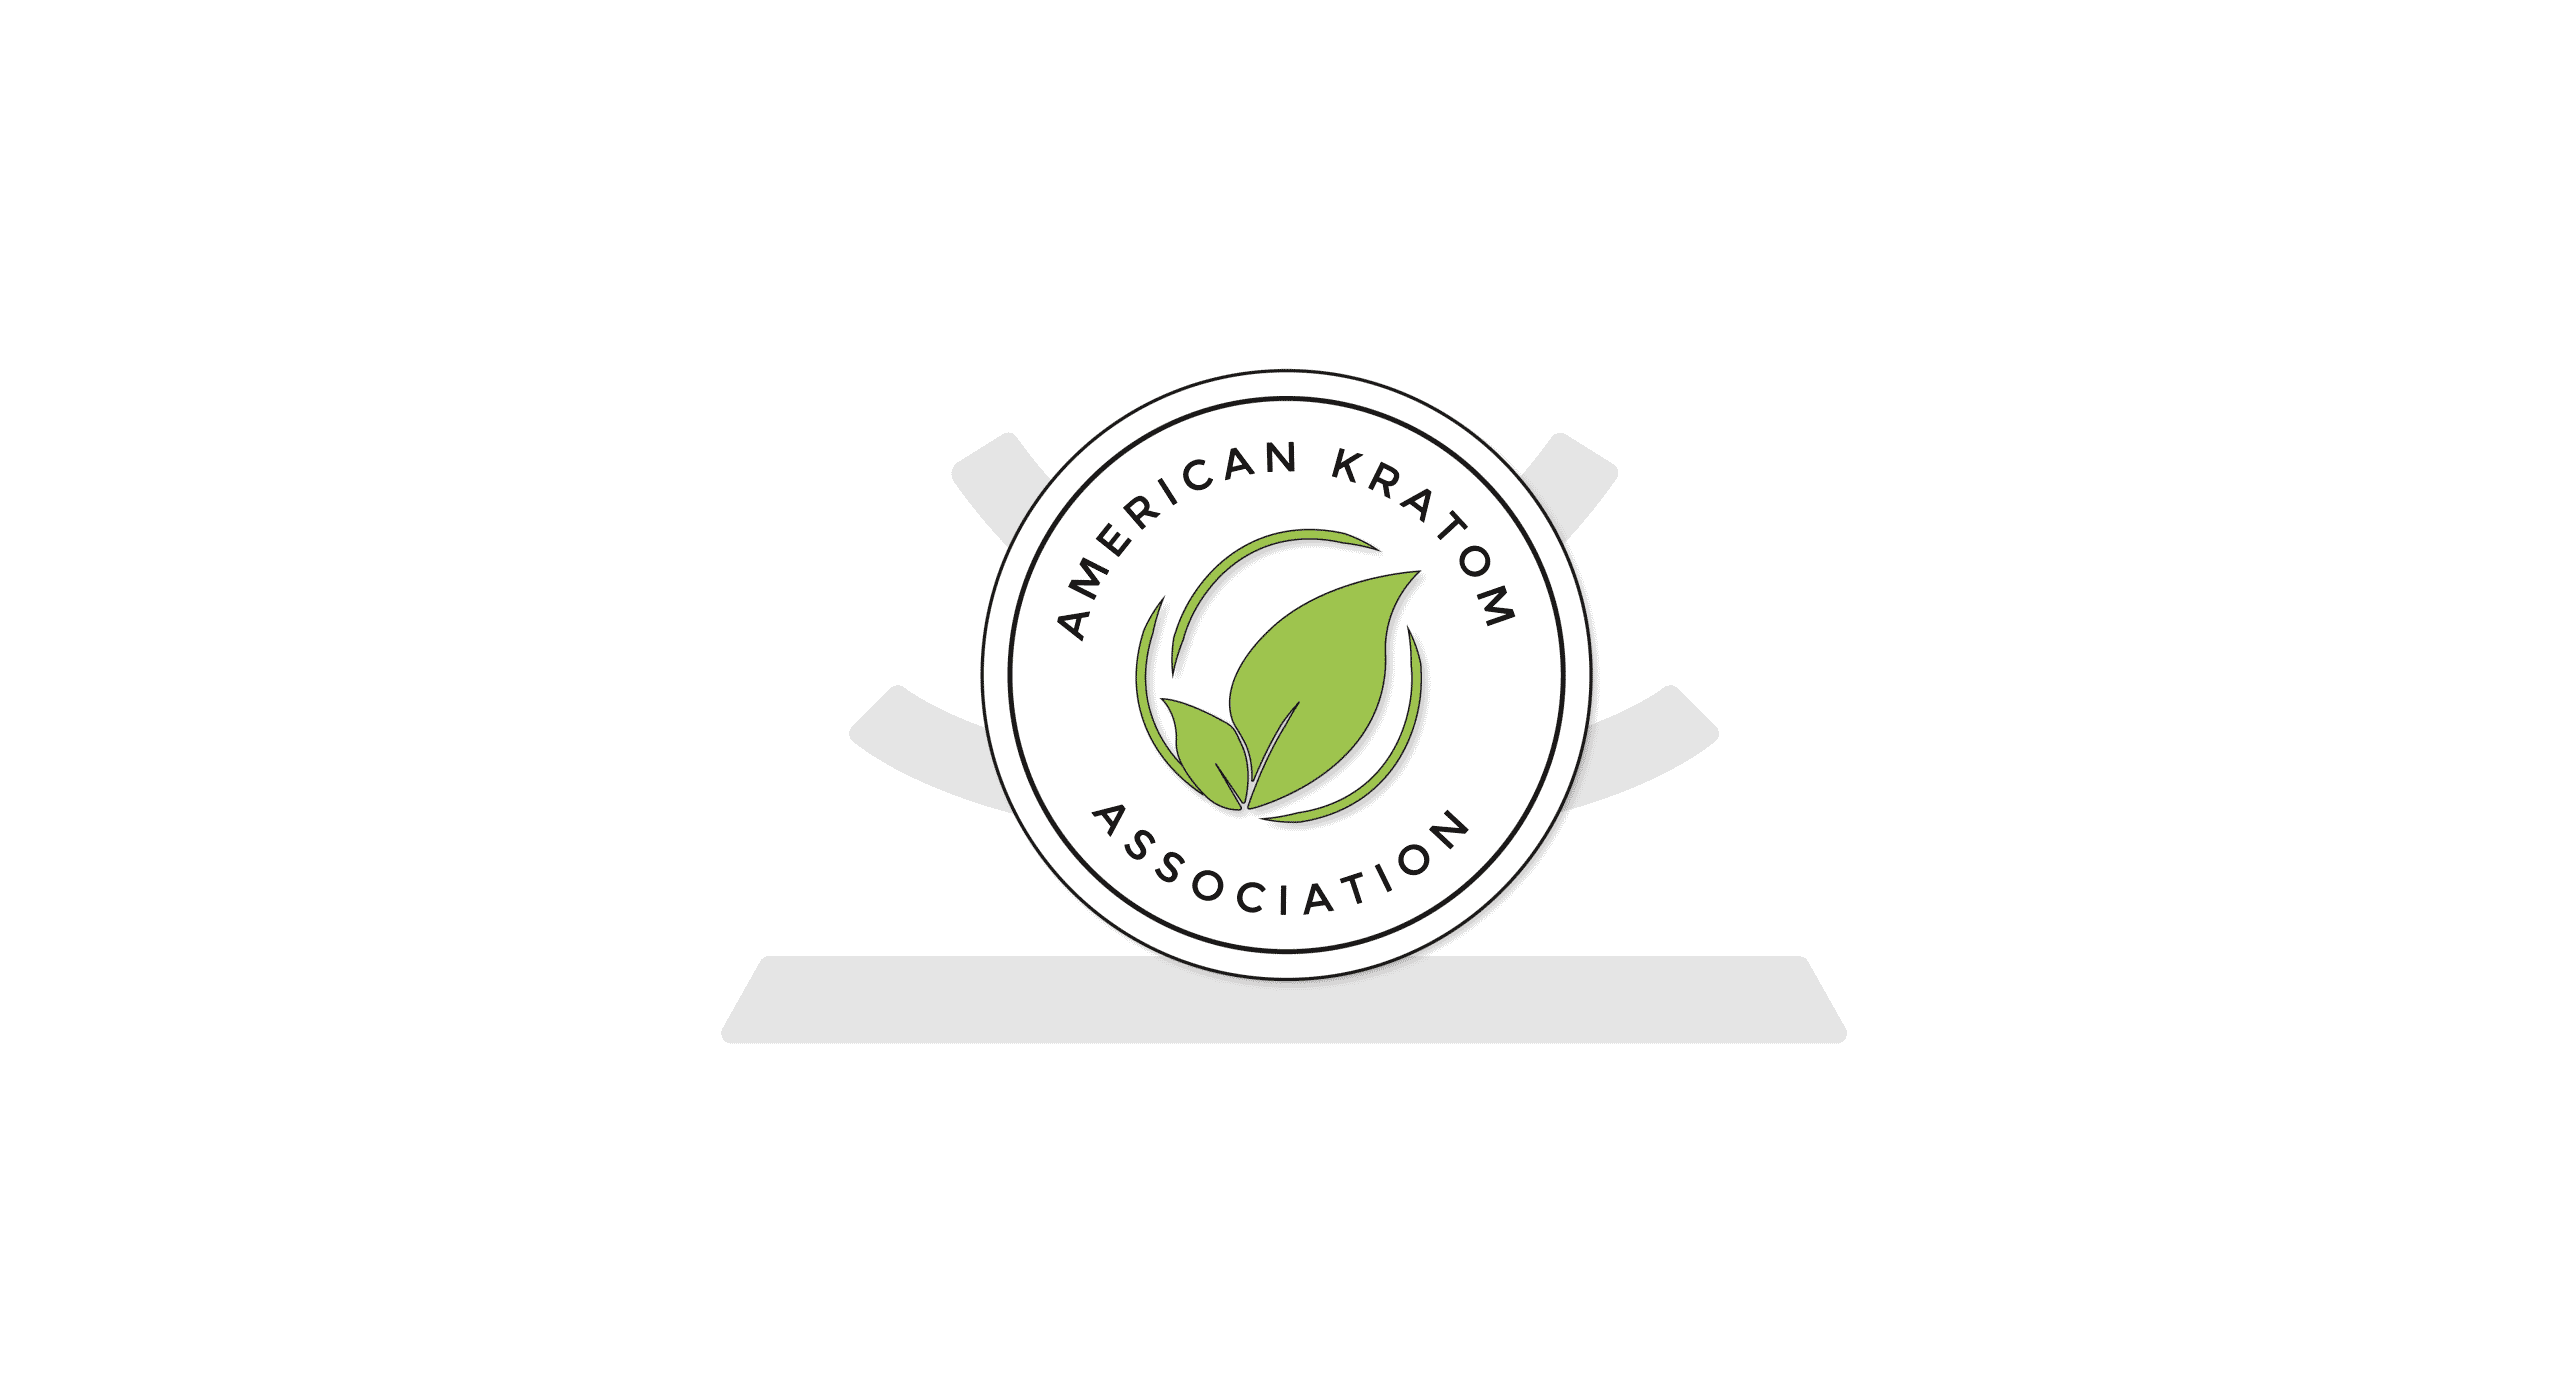 What is the American Kratom Association?